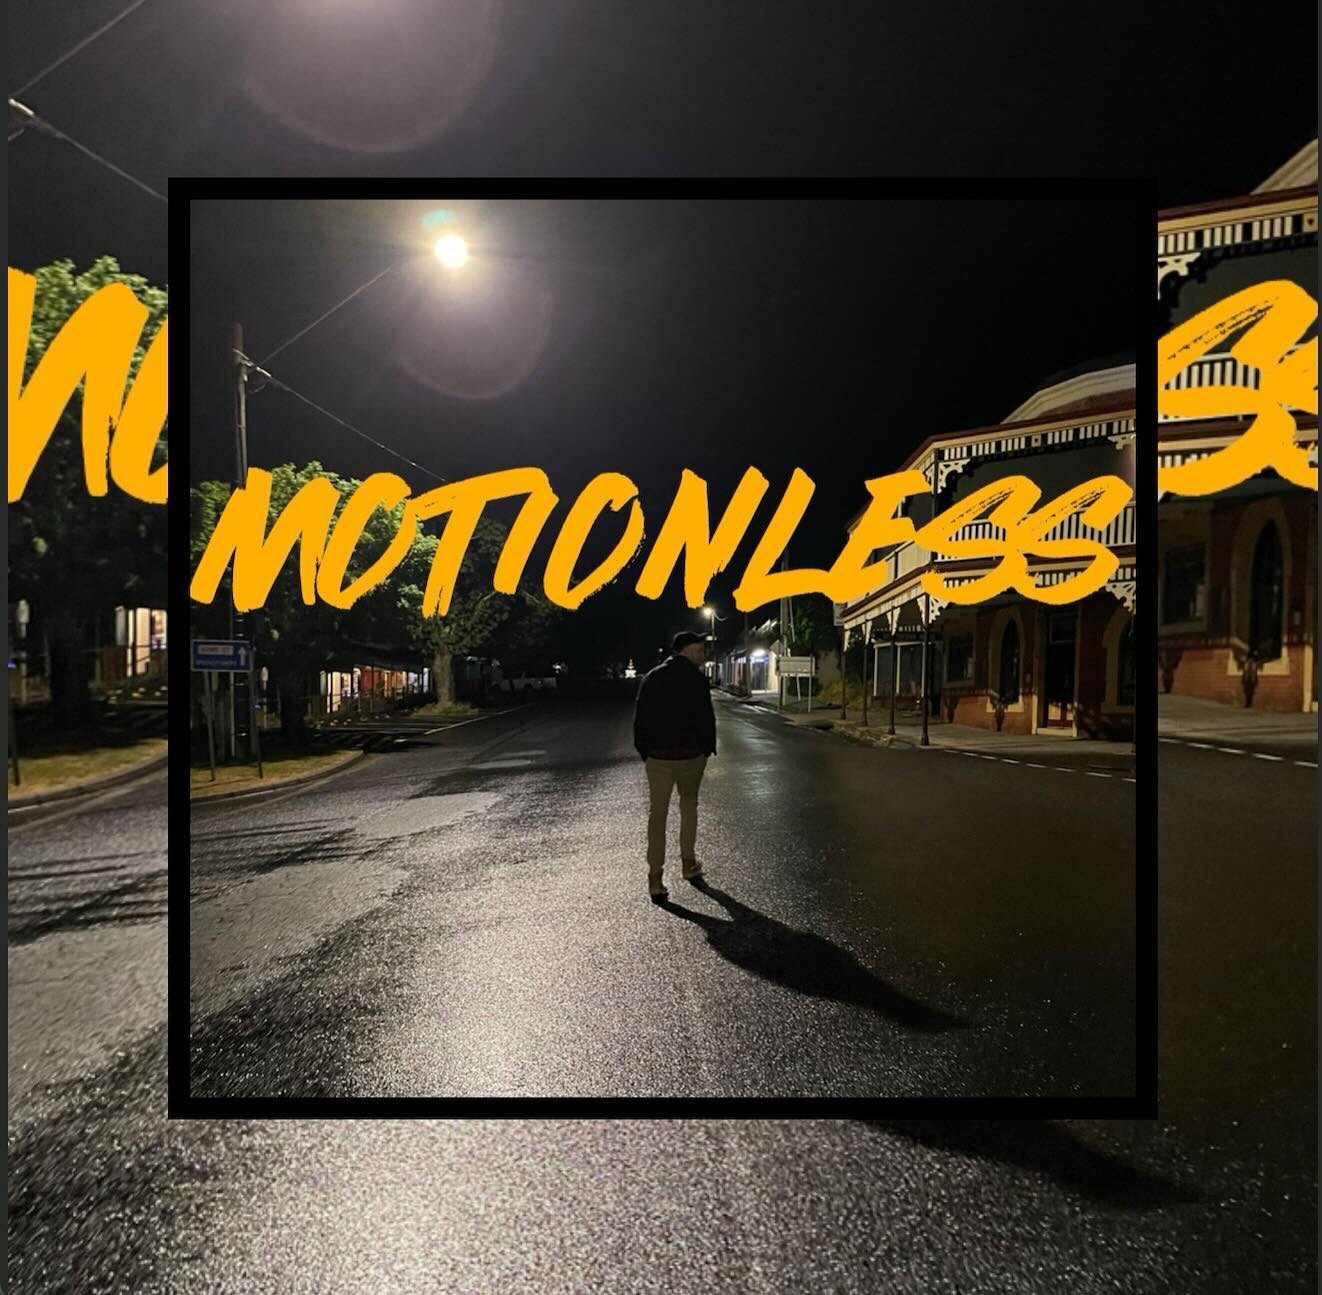 Motionless is now available for your enjoyment! A little different from my usual acoustic flavours but I&rsquo;m sure you&rsquo;ll enjoy it. If you haven&rsquo;t got your tickets for our @palais_hepburn show on March 22, do it! It&rsquo;ll be a huge 